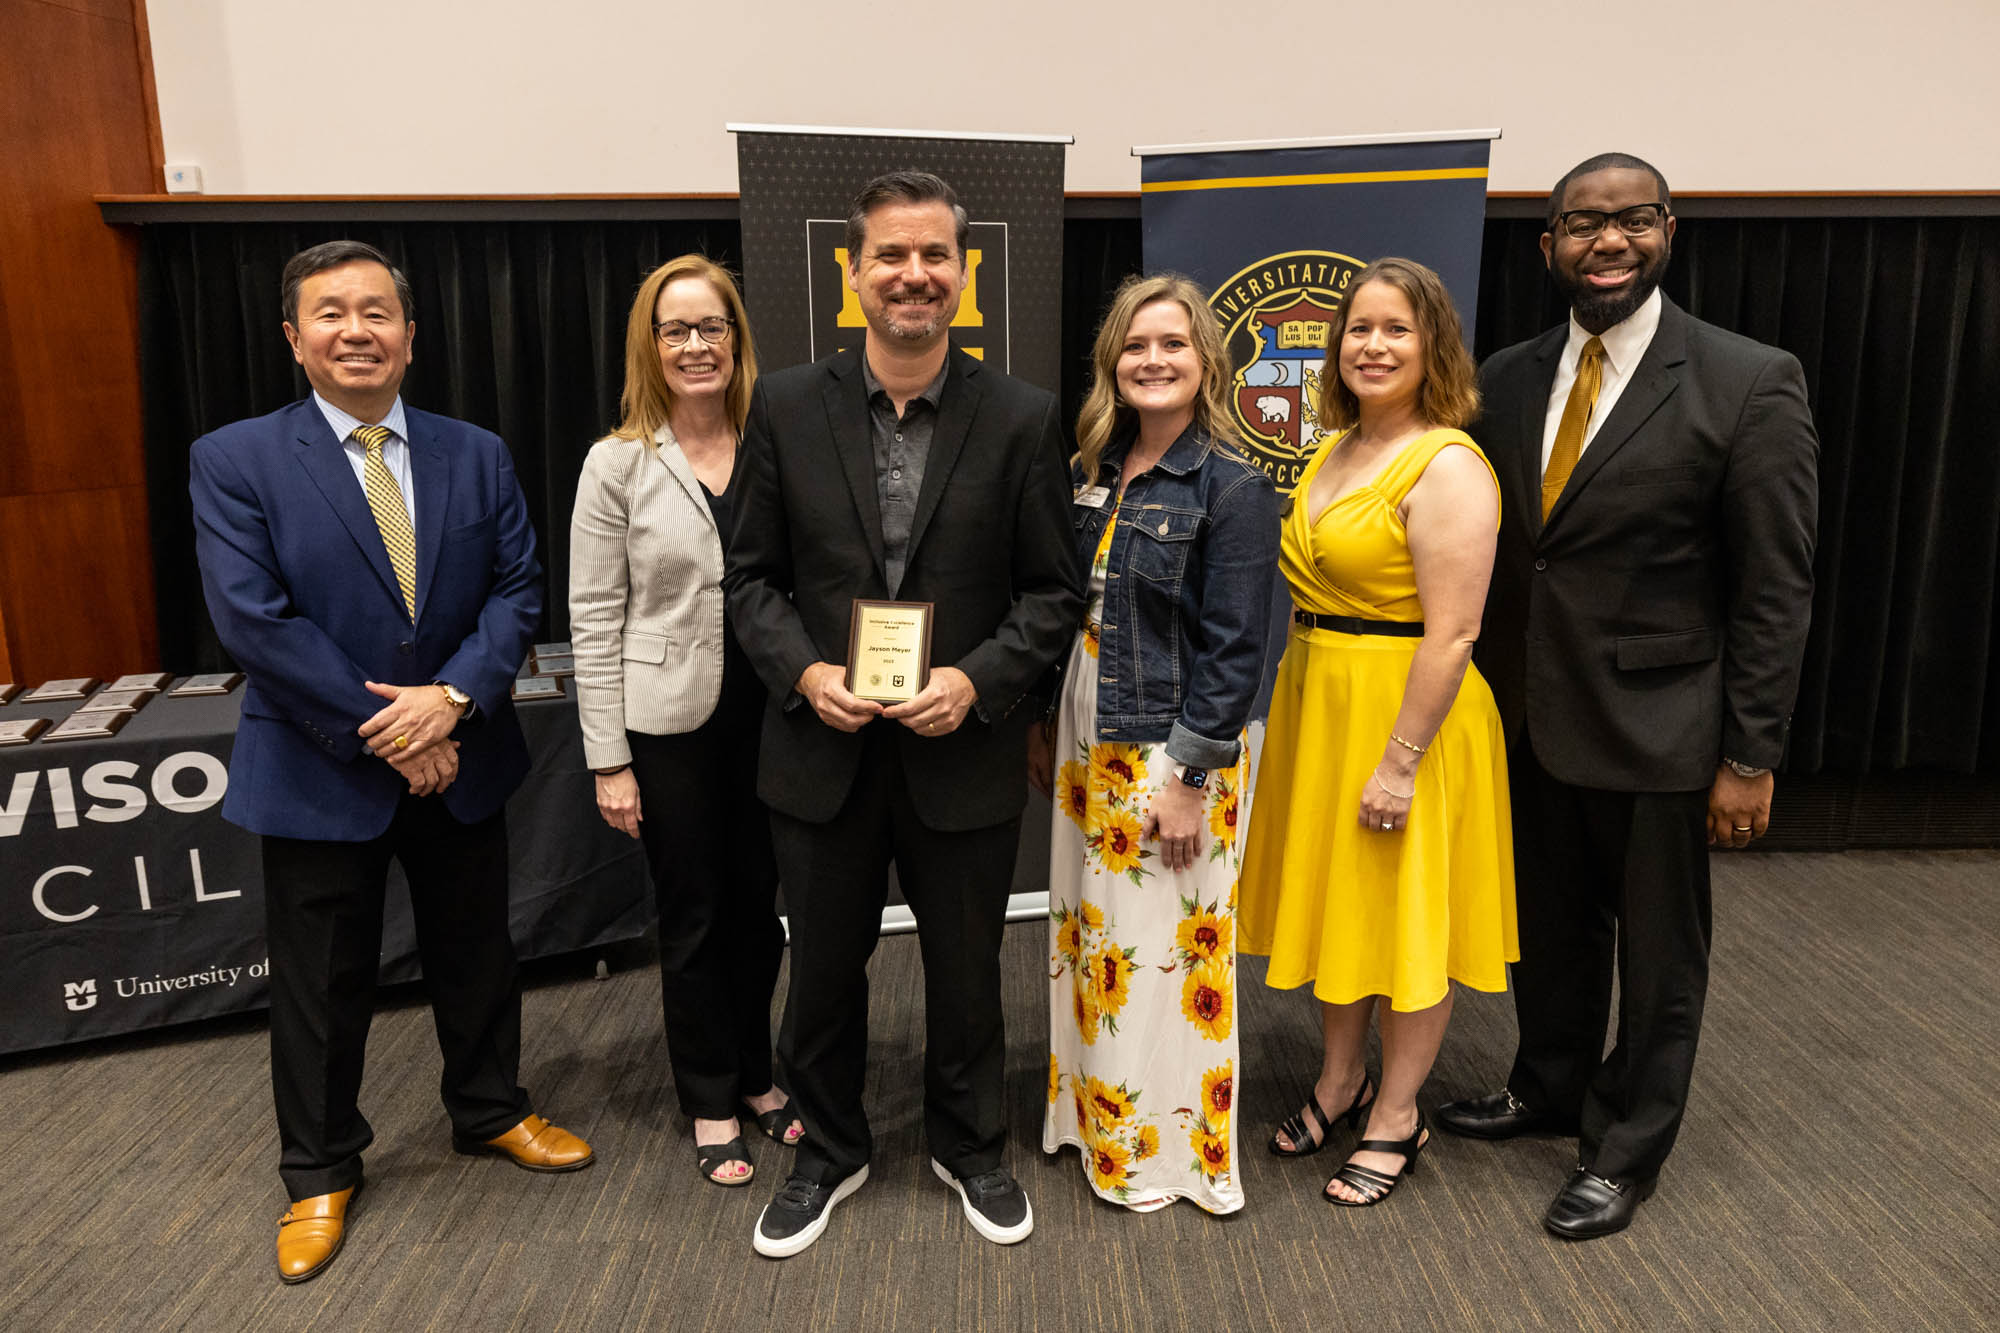 Inclusive Excellence Award: Jayson Meyer – Alumni Relations